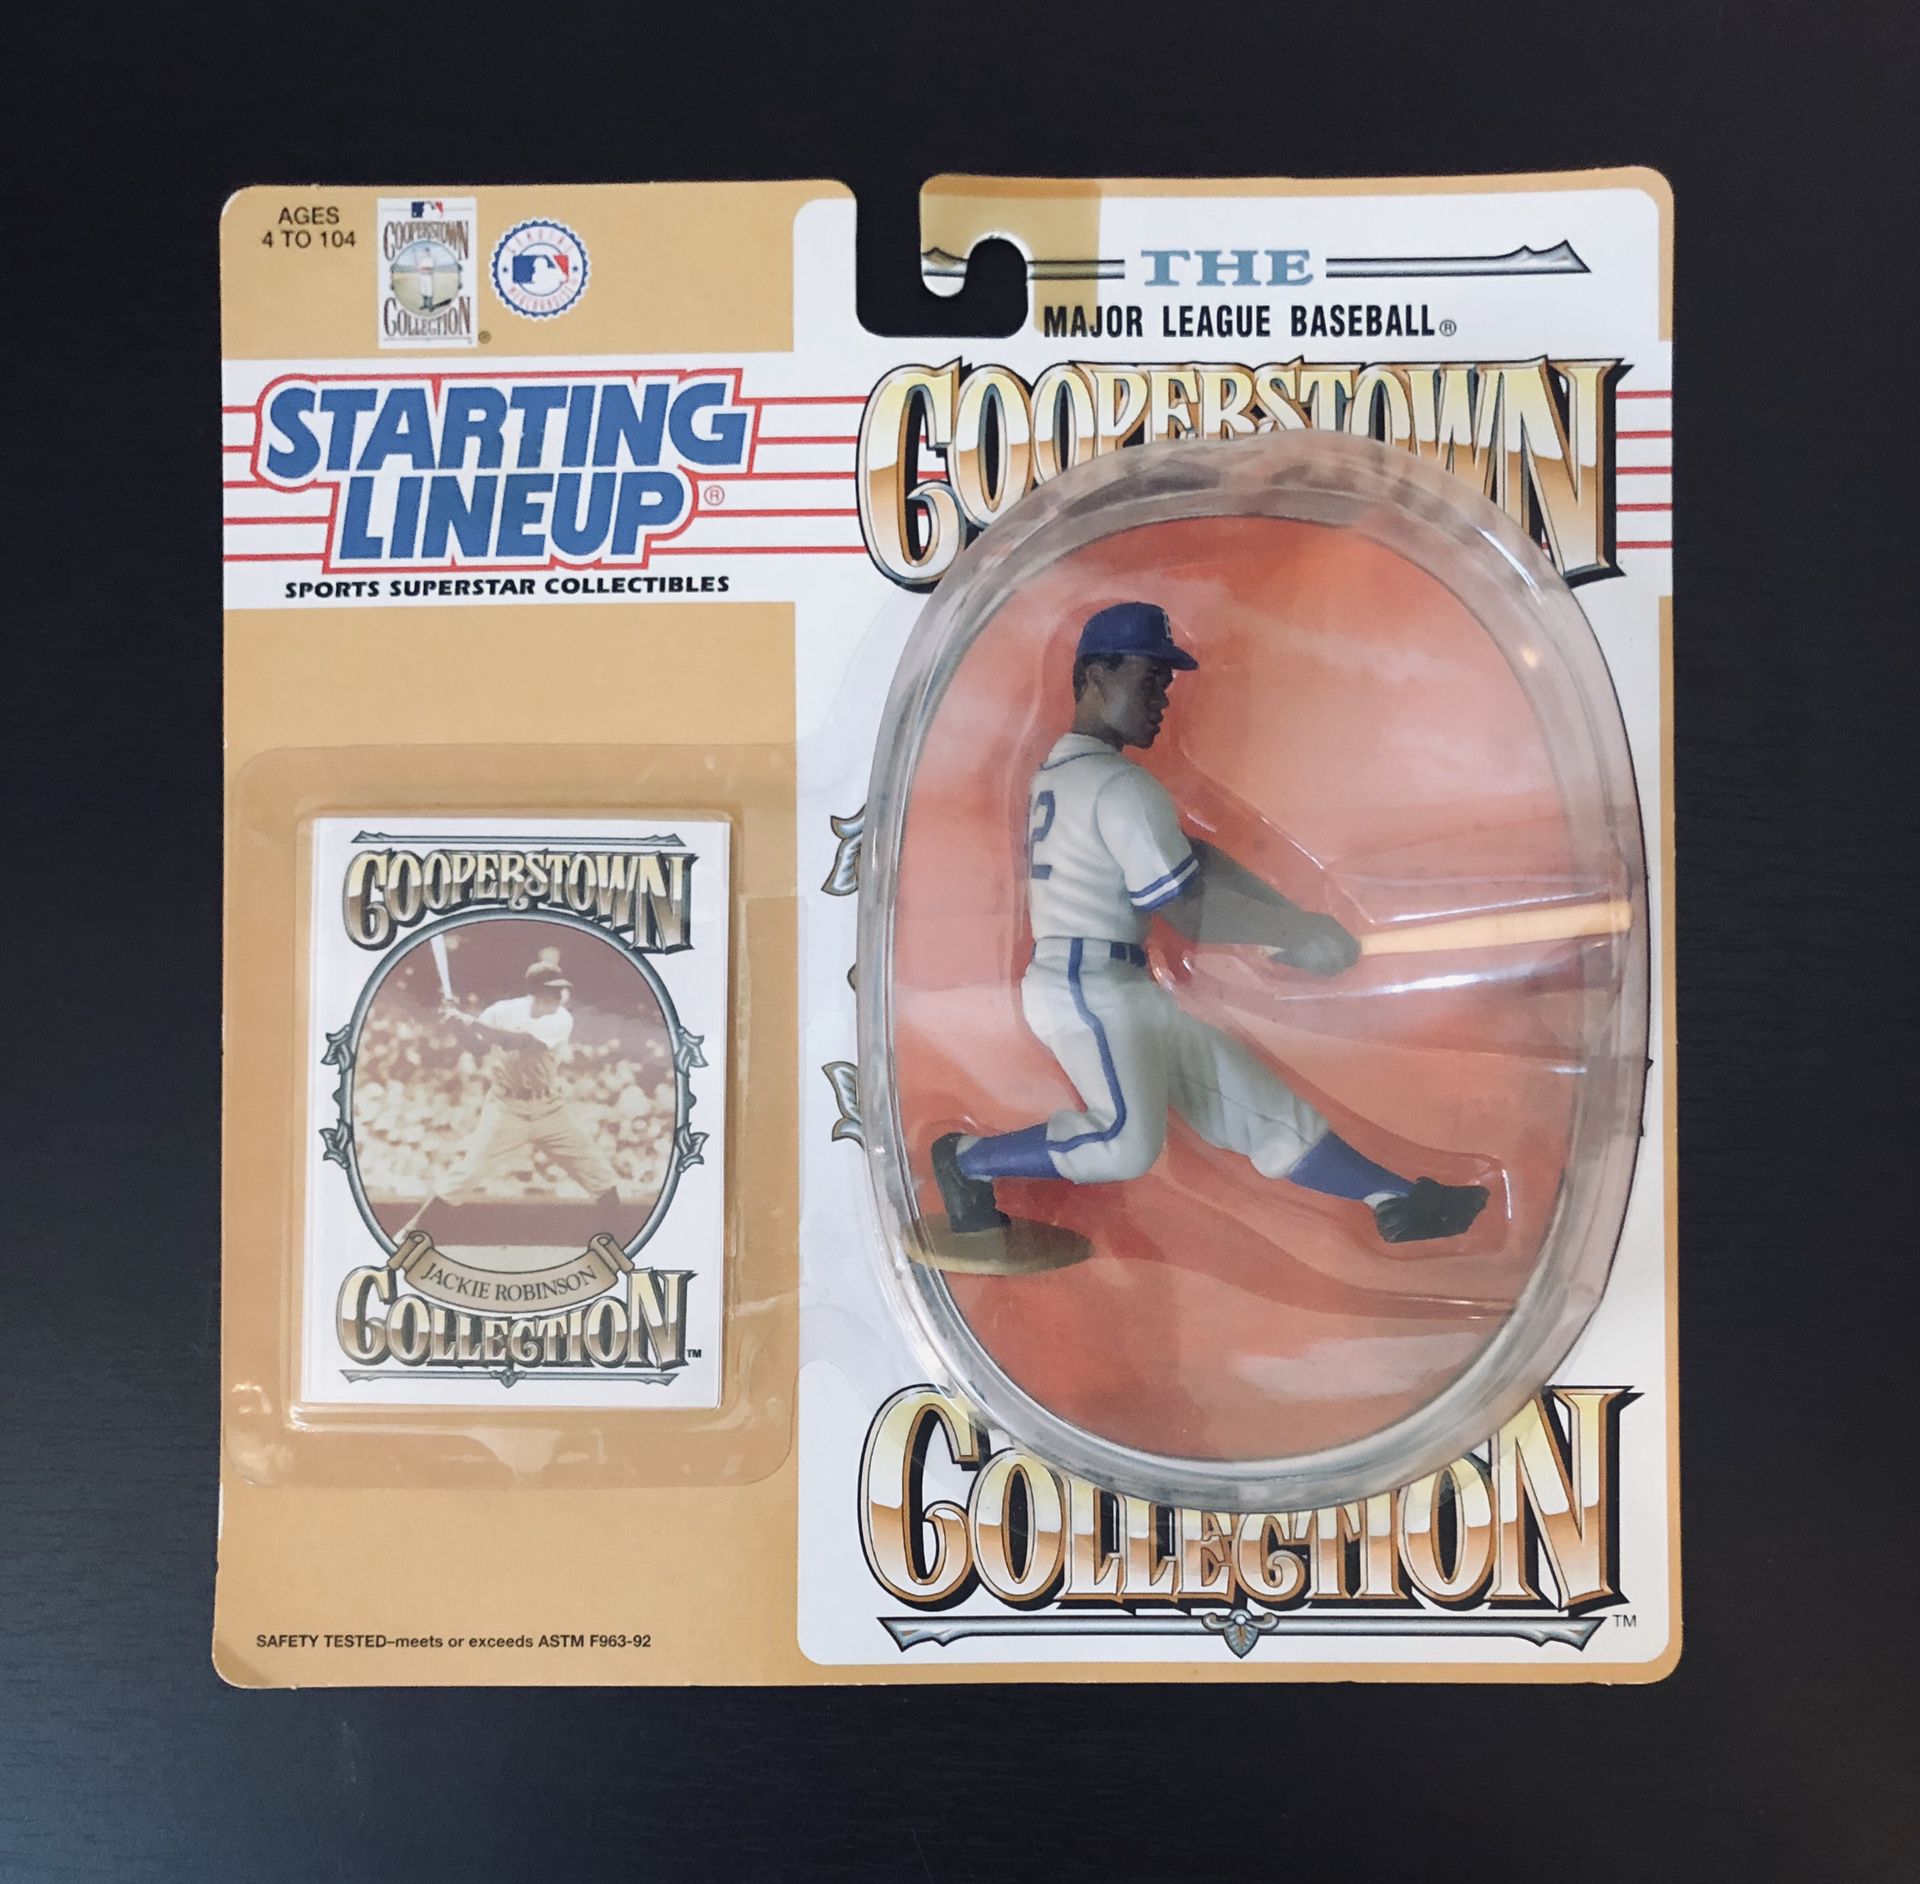 1994 Jackie Robinson Brooklyn Dodgers MLB Baseball Cooperstown Collection SLU Starting Lineup Action Figure - BRAND NEW!